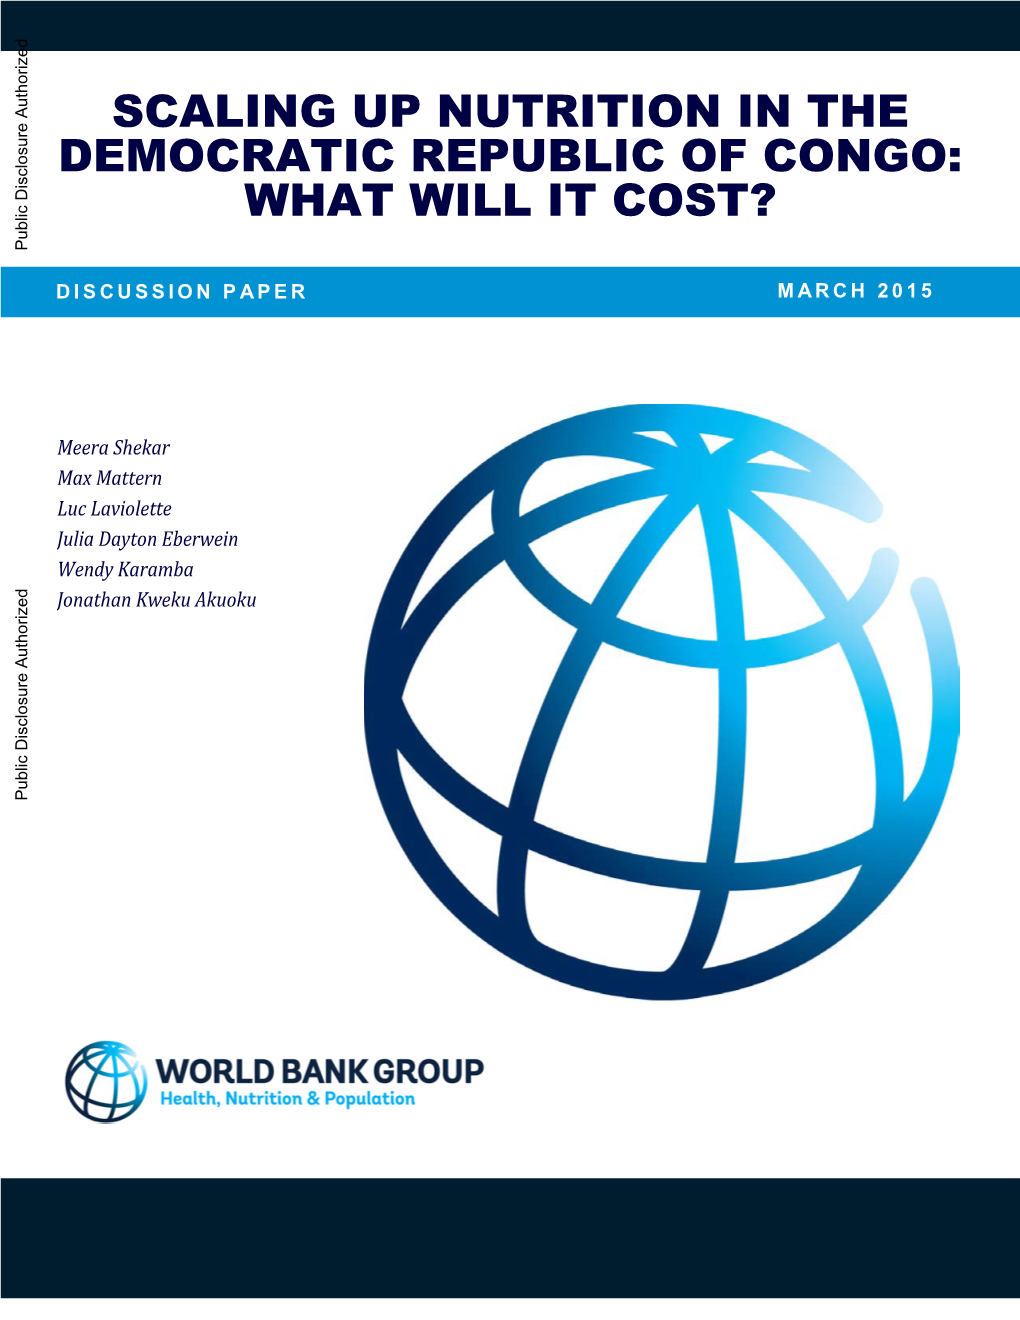 Scaling up Nutrition in the Democratic Republic of Congo: What Will It Cost?